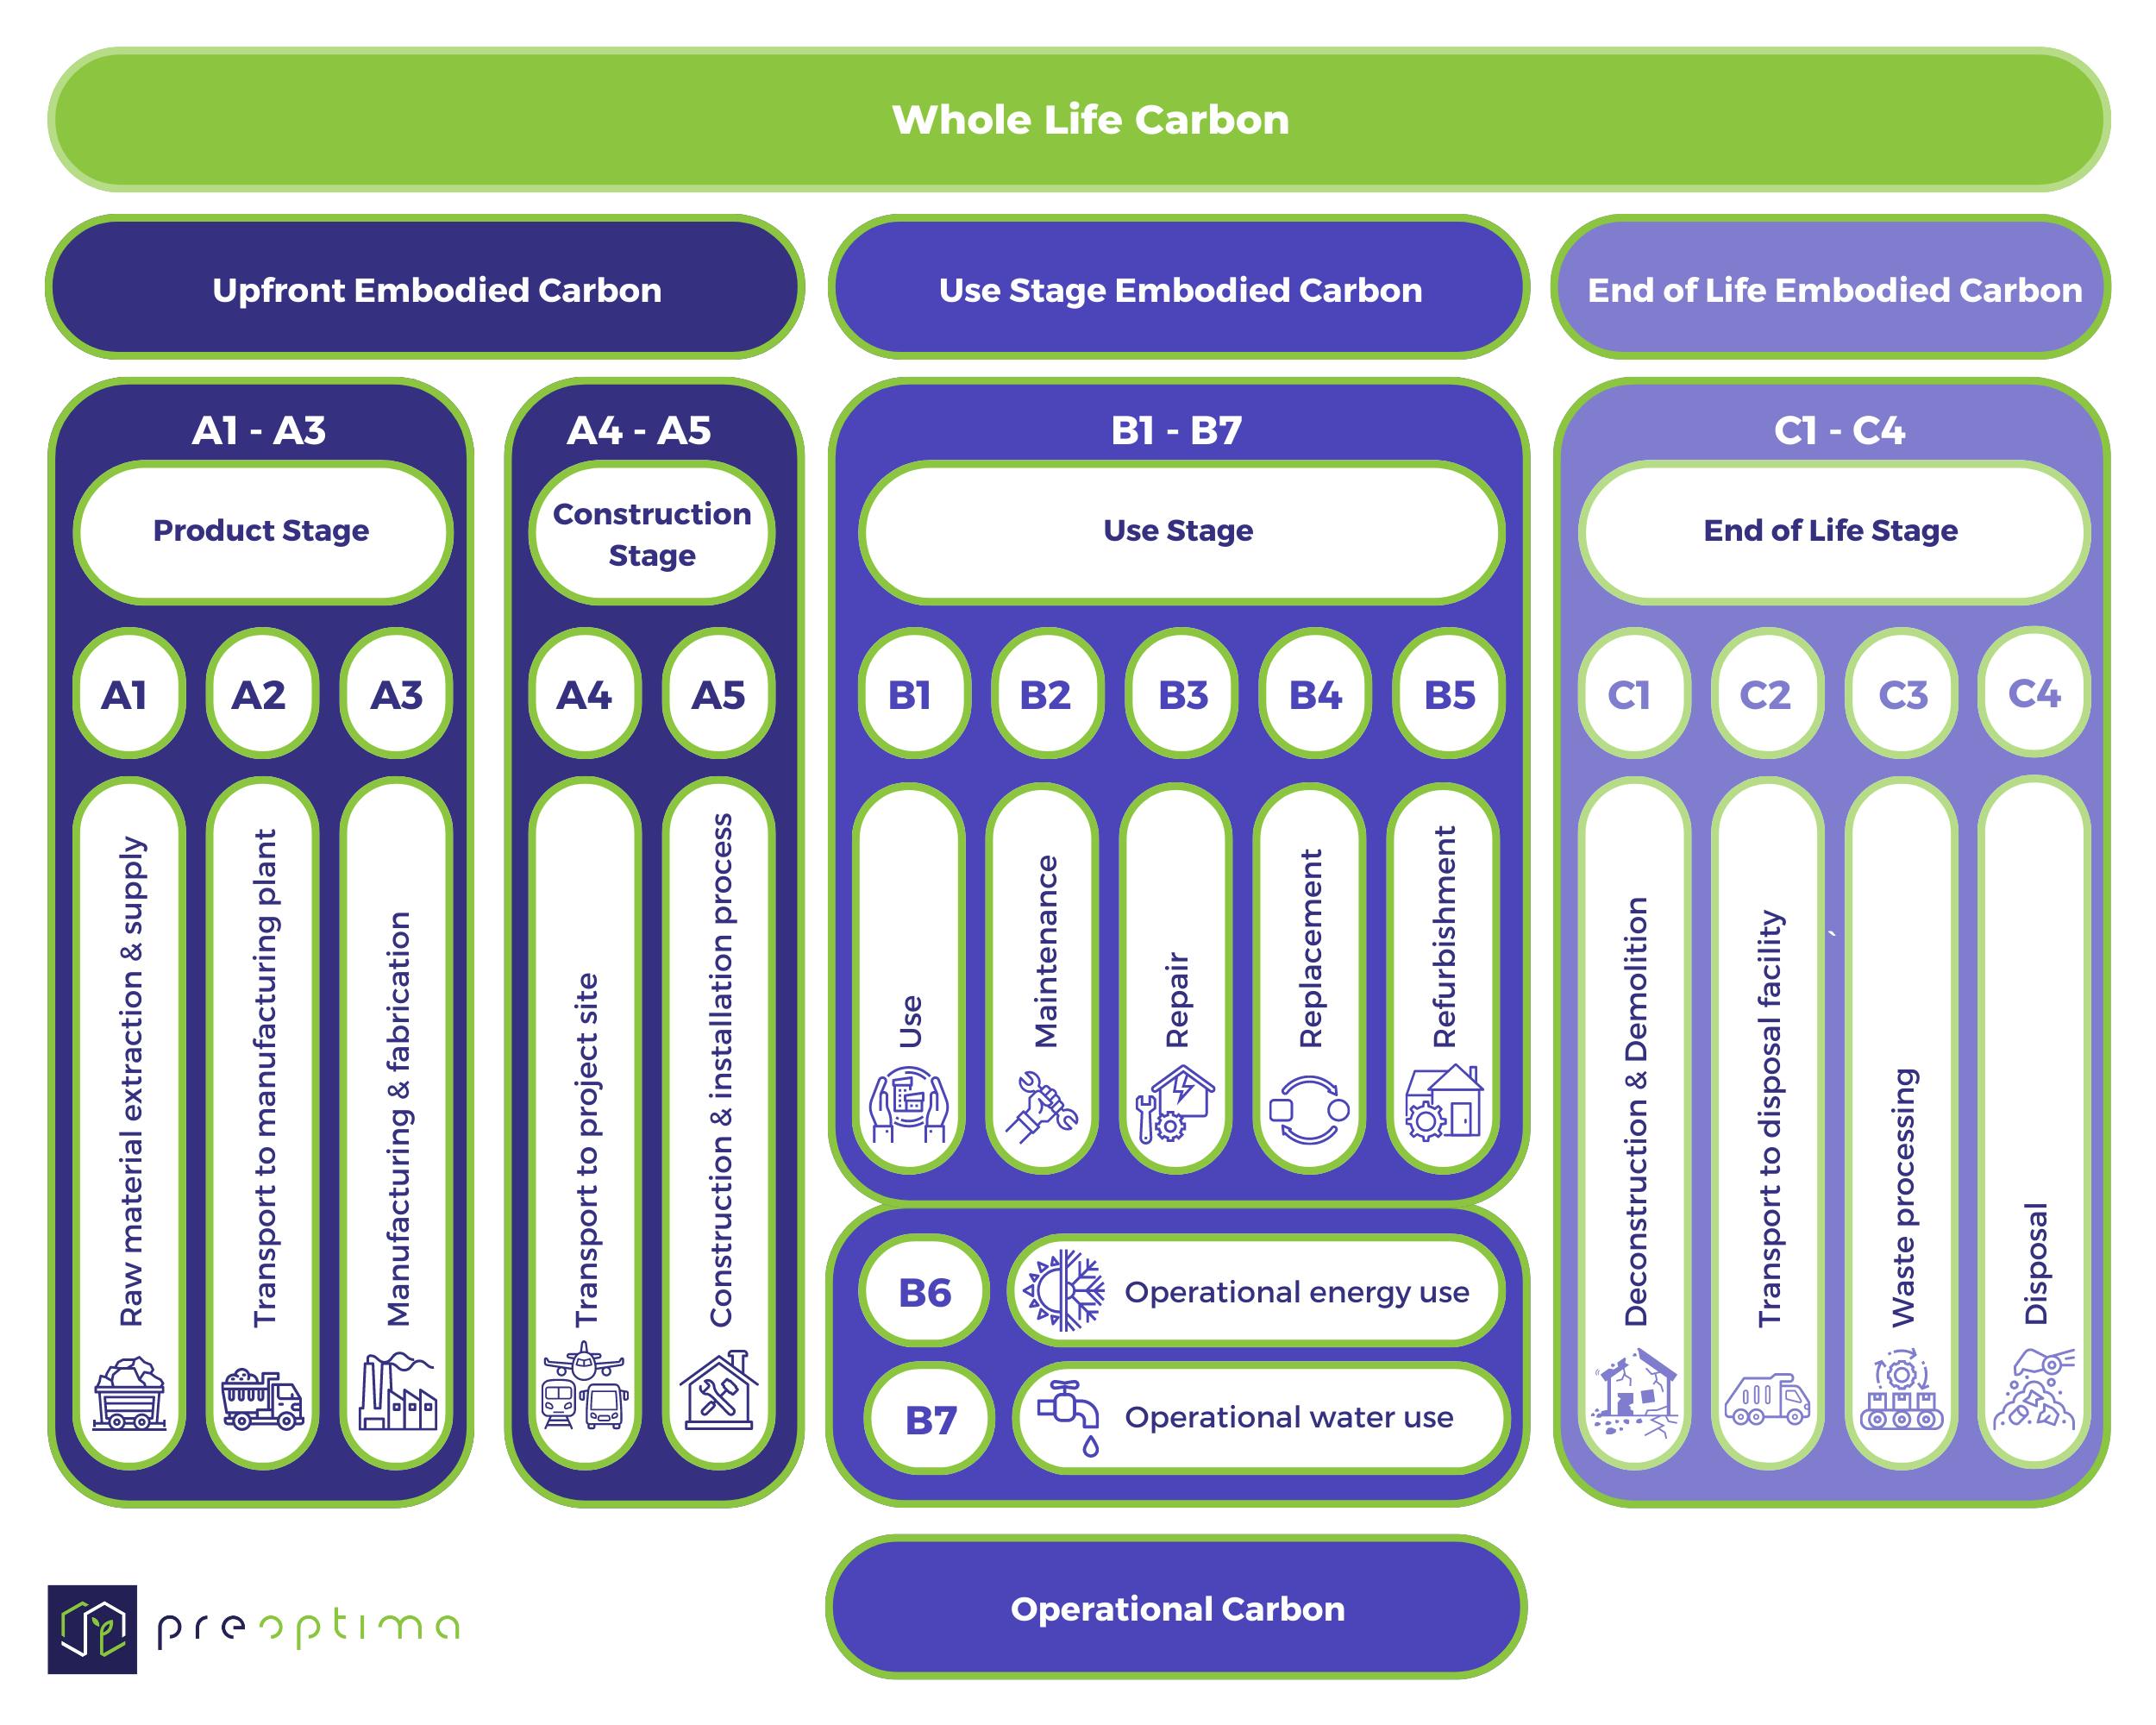 Building Life Cycle Assessment Information / Building Whole Life Carbon Information